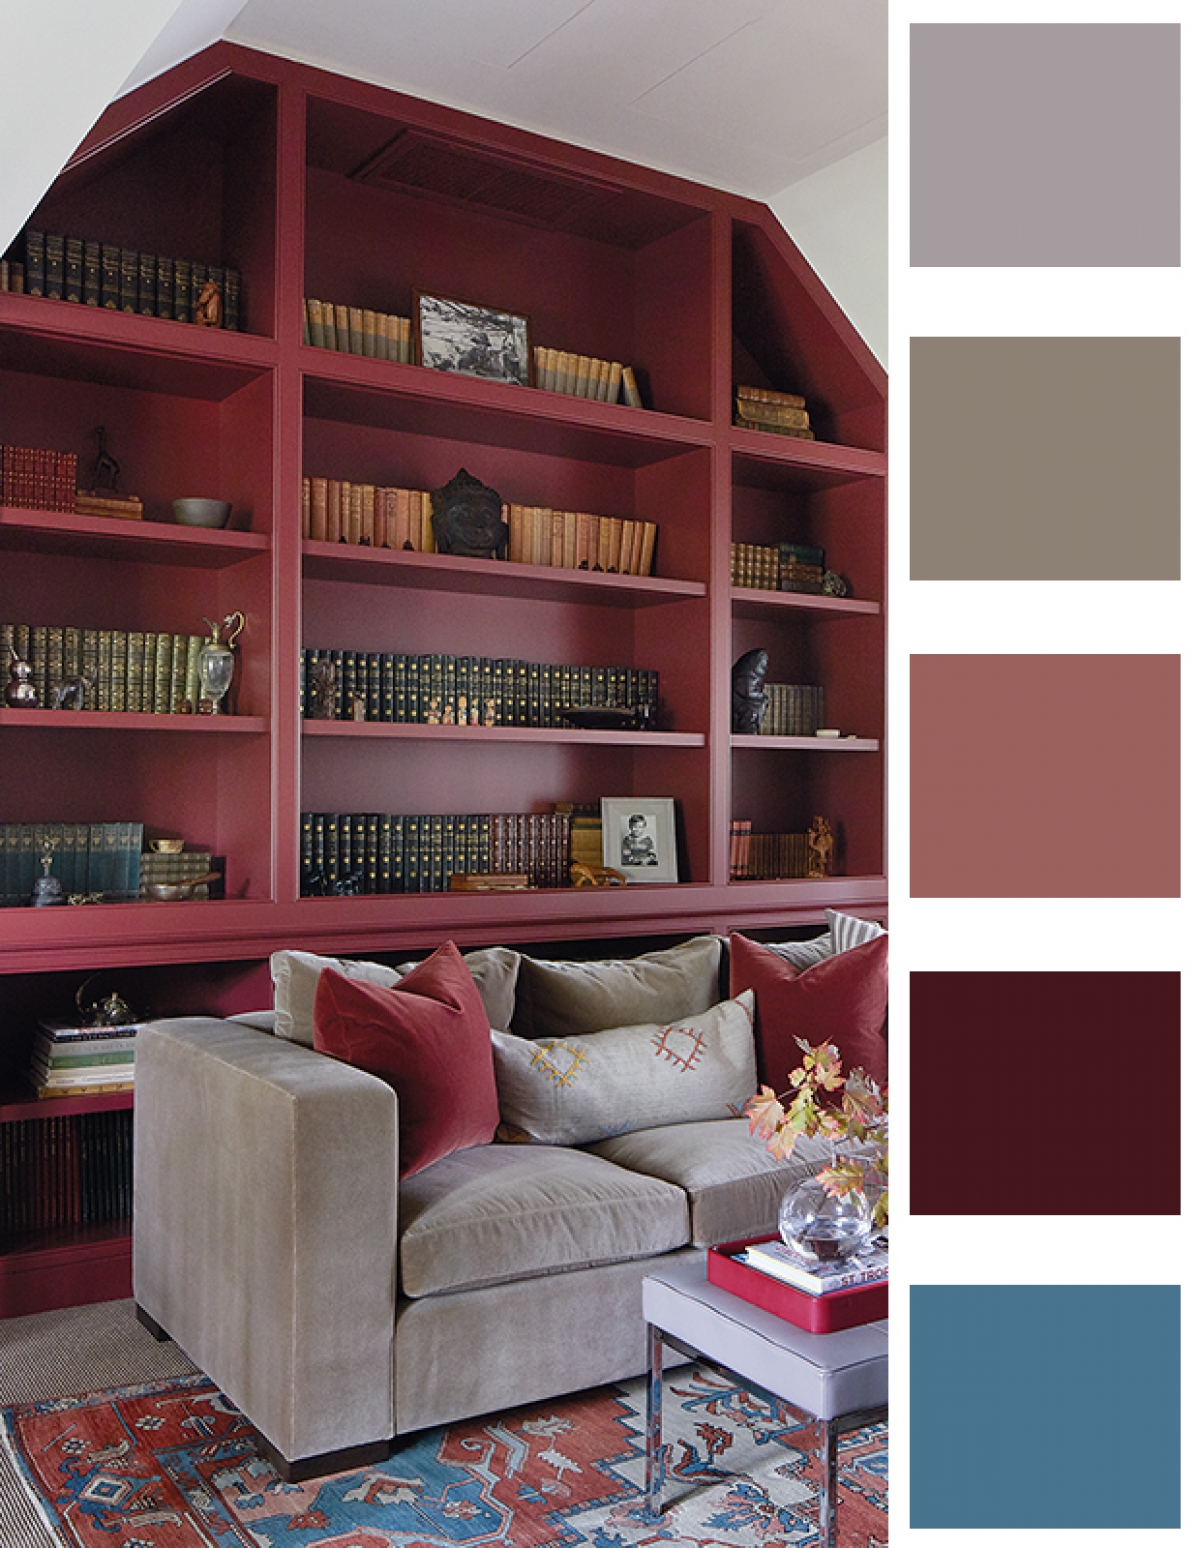 Designer J Gibson helps you pair red colors without causing eye strain in the room.